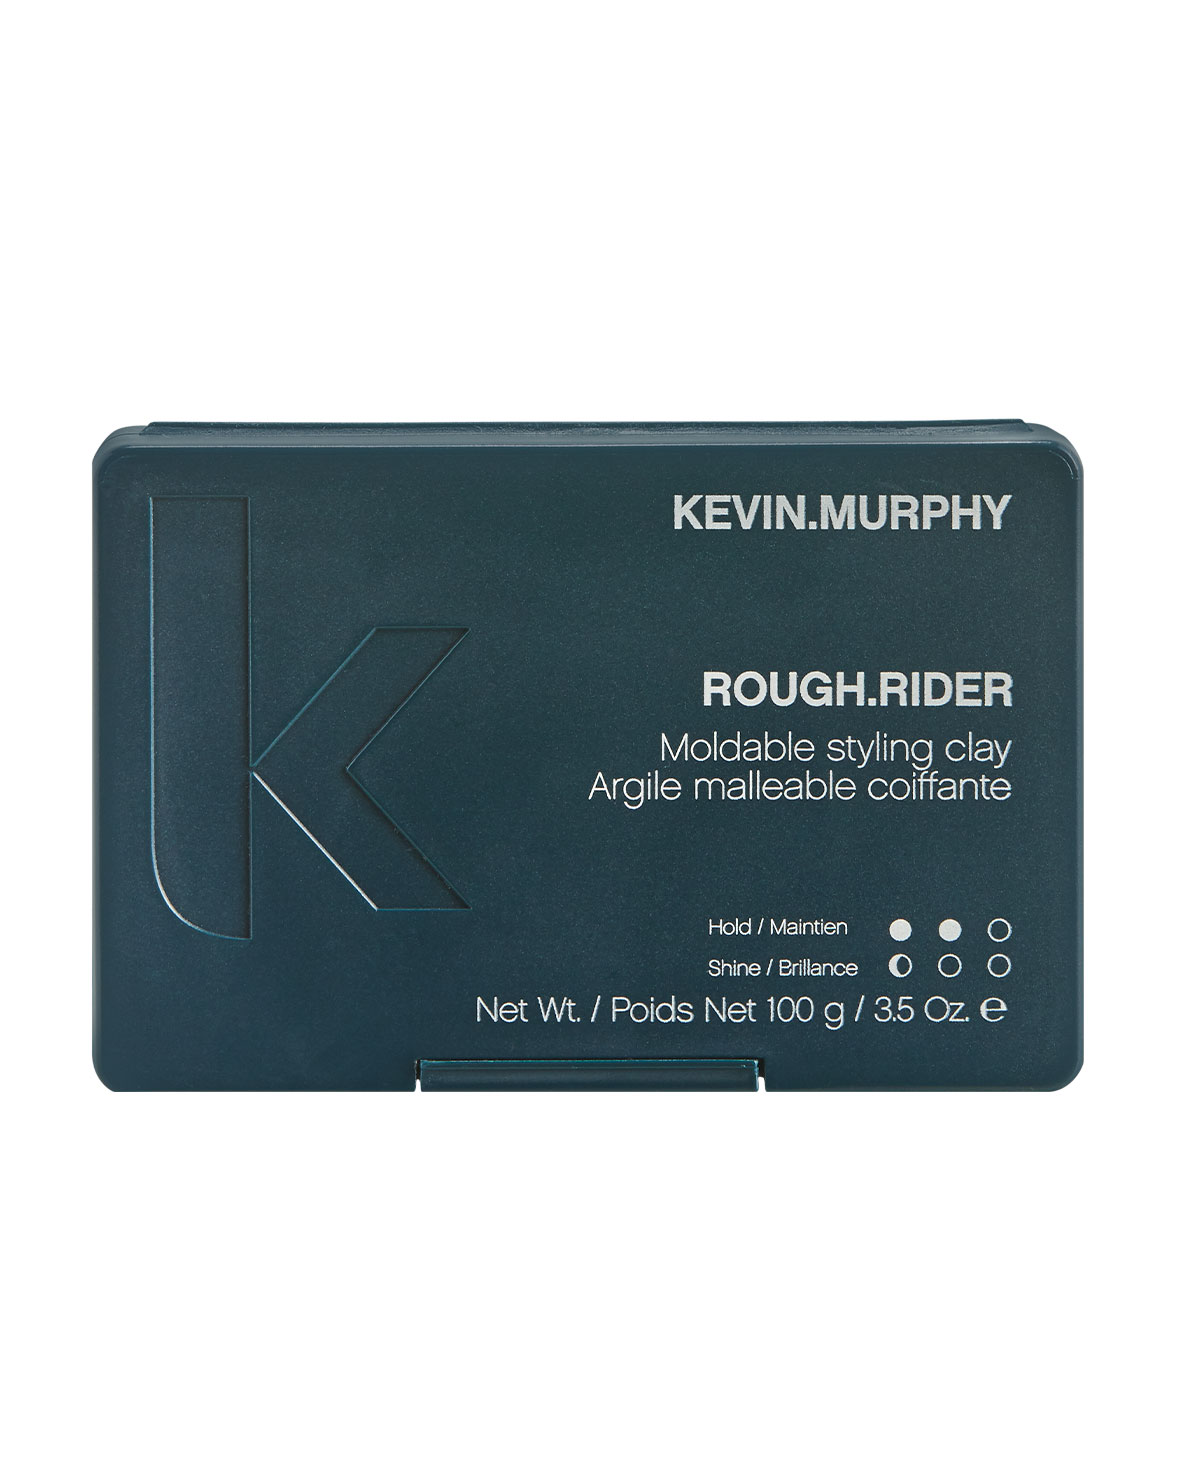 Kevin.Murphy ROUGH.RIDER 100g